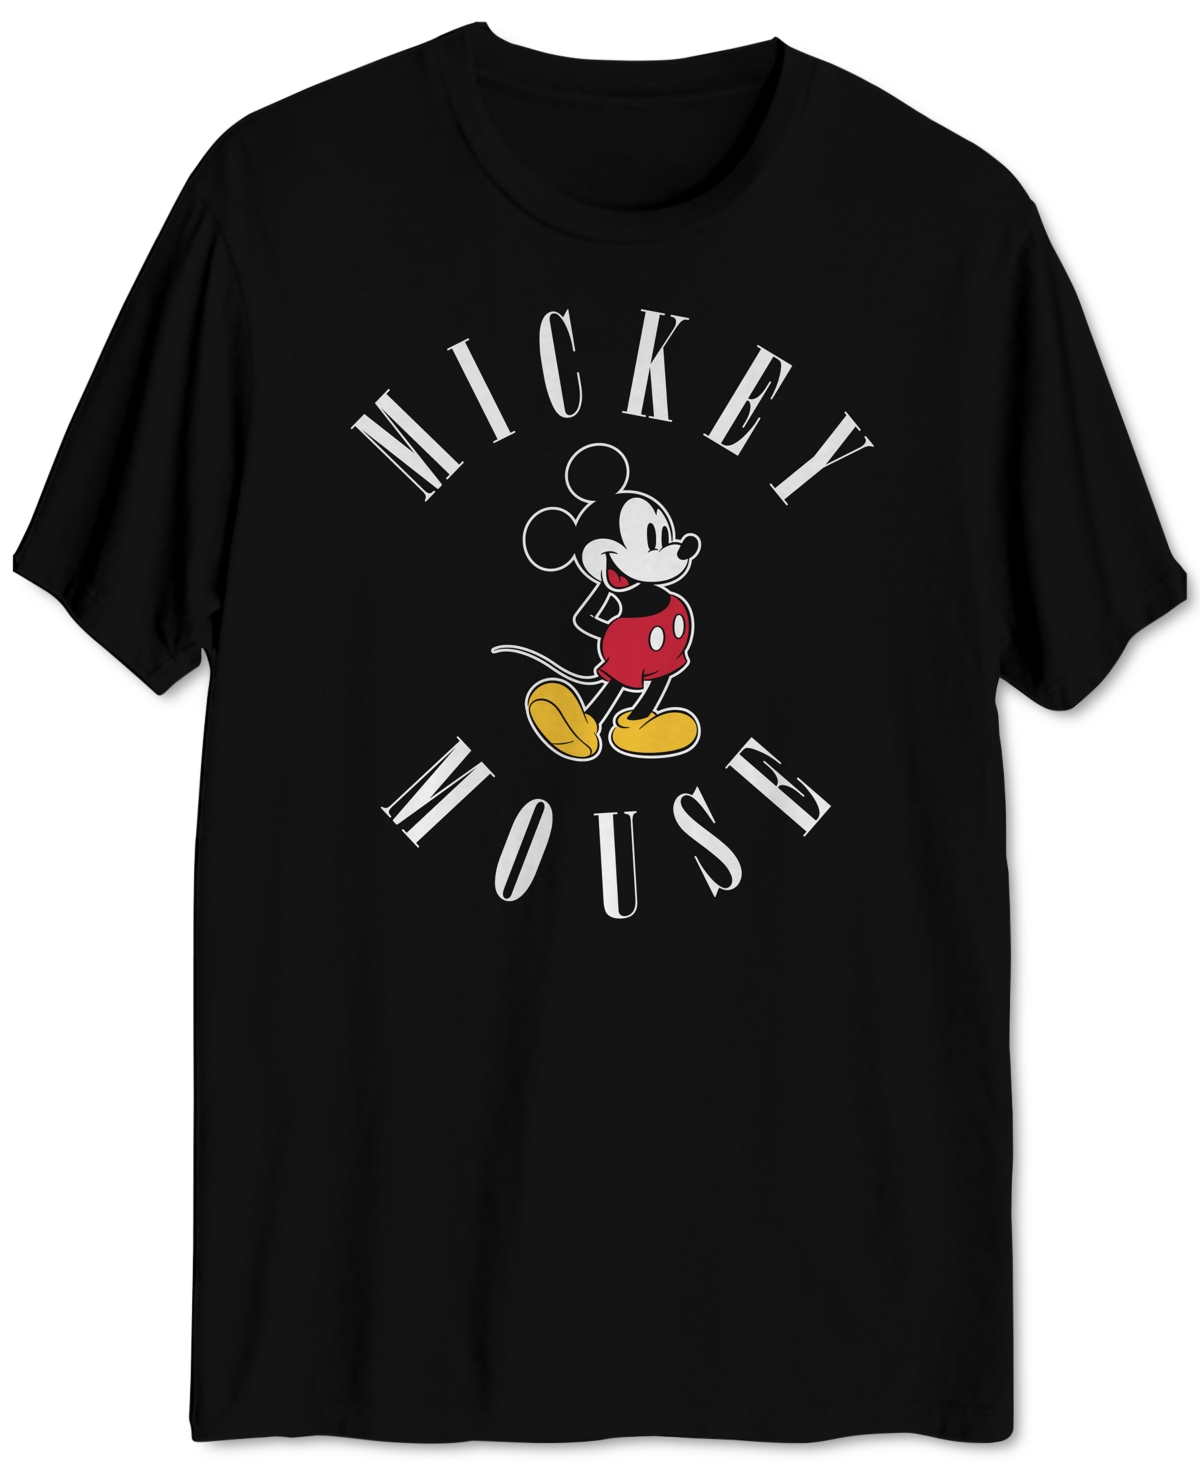 Nineties Mickey Mouse Men's Graphic T-Shirt - Black